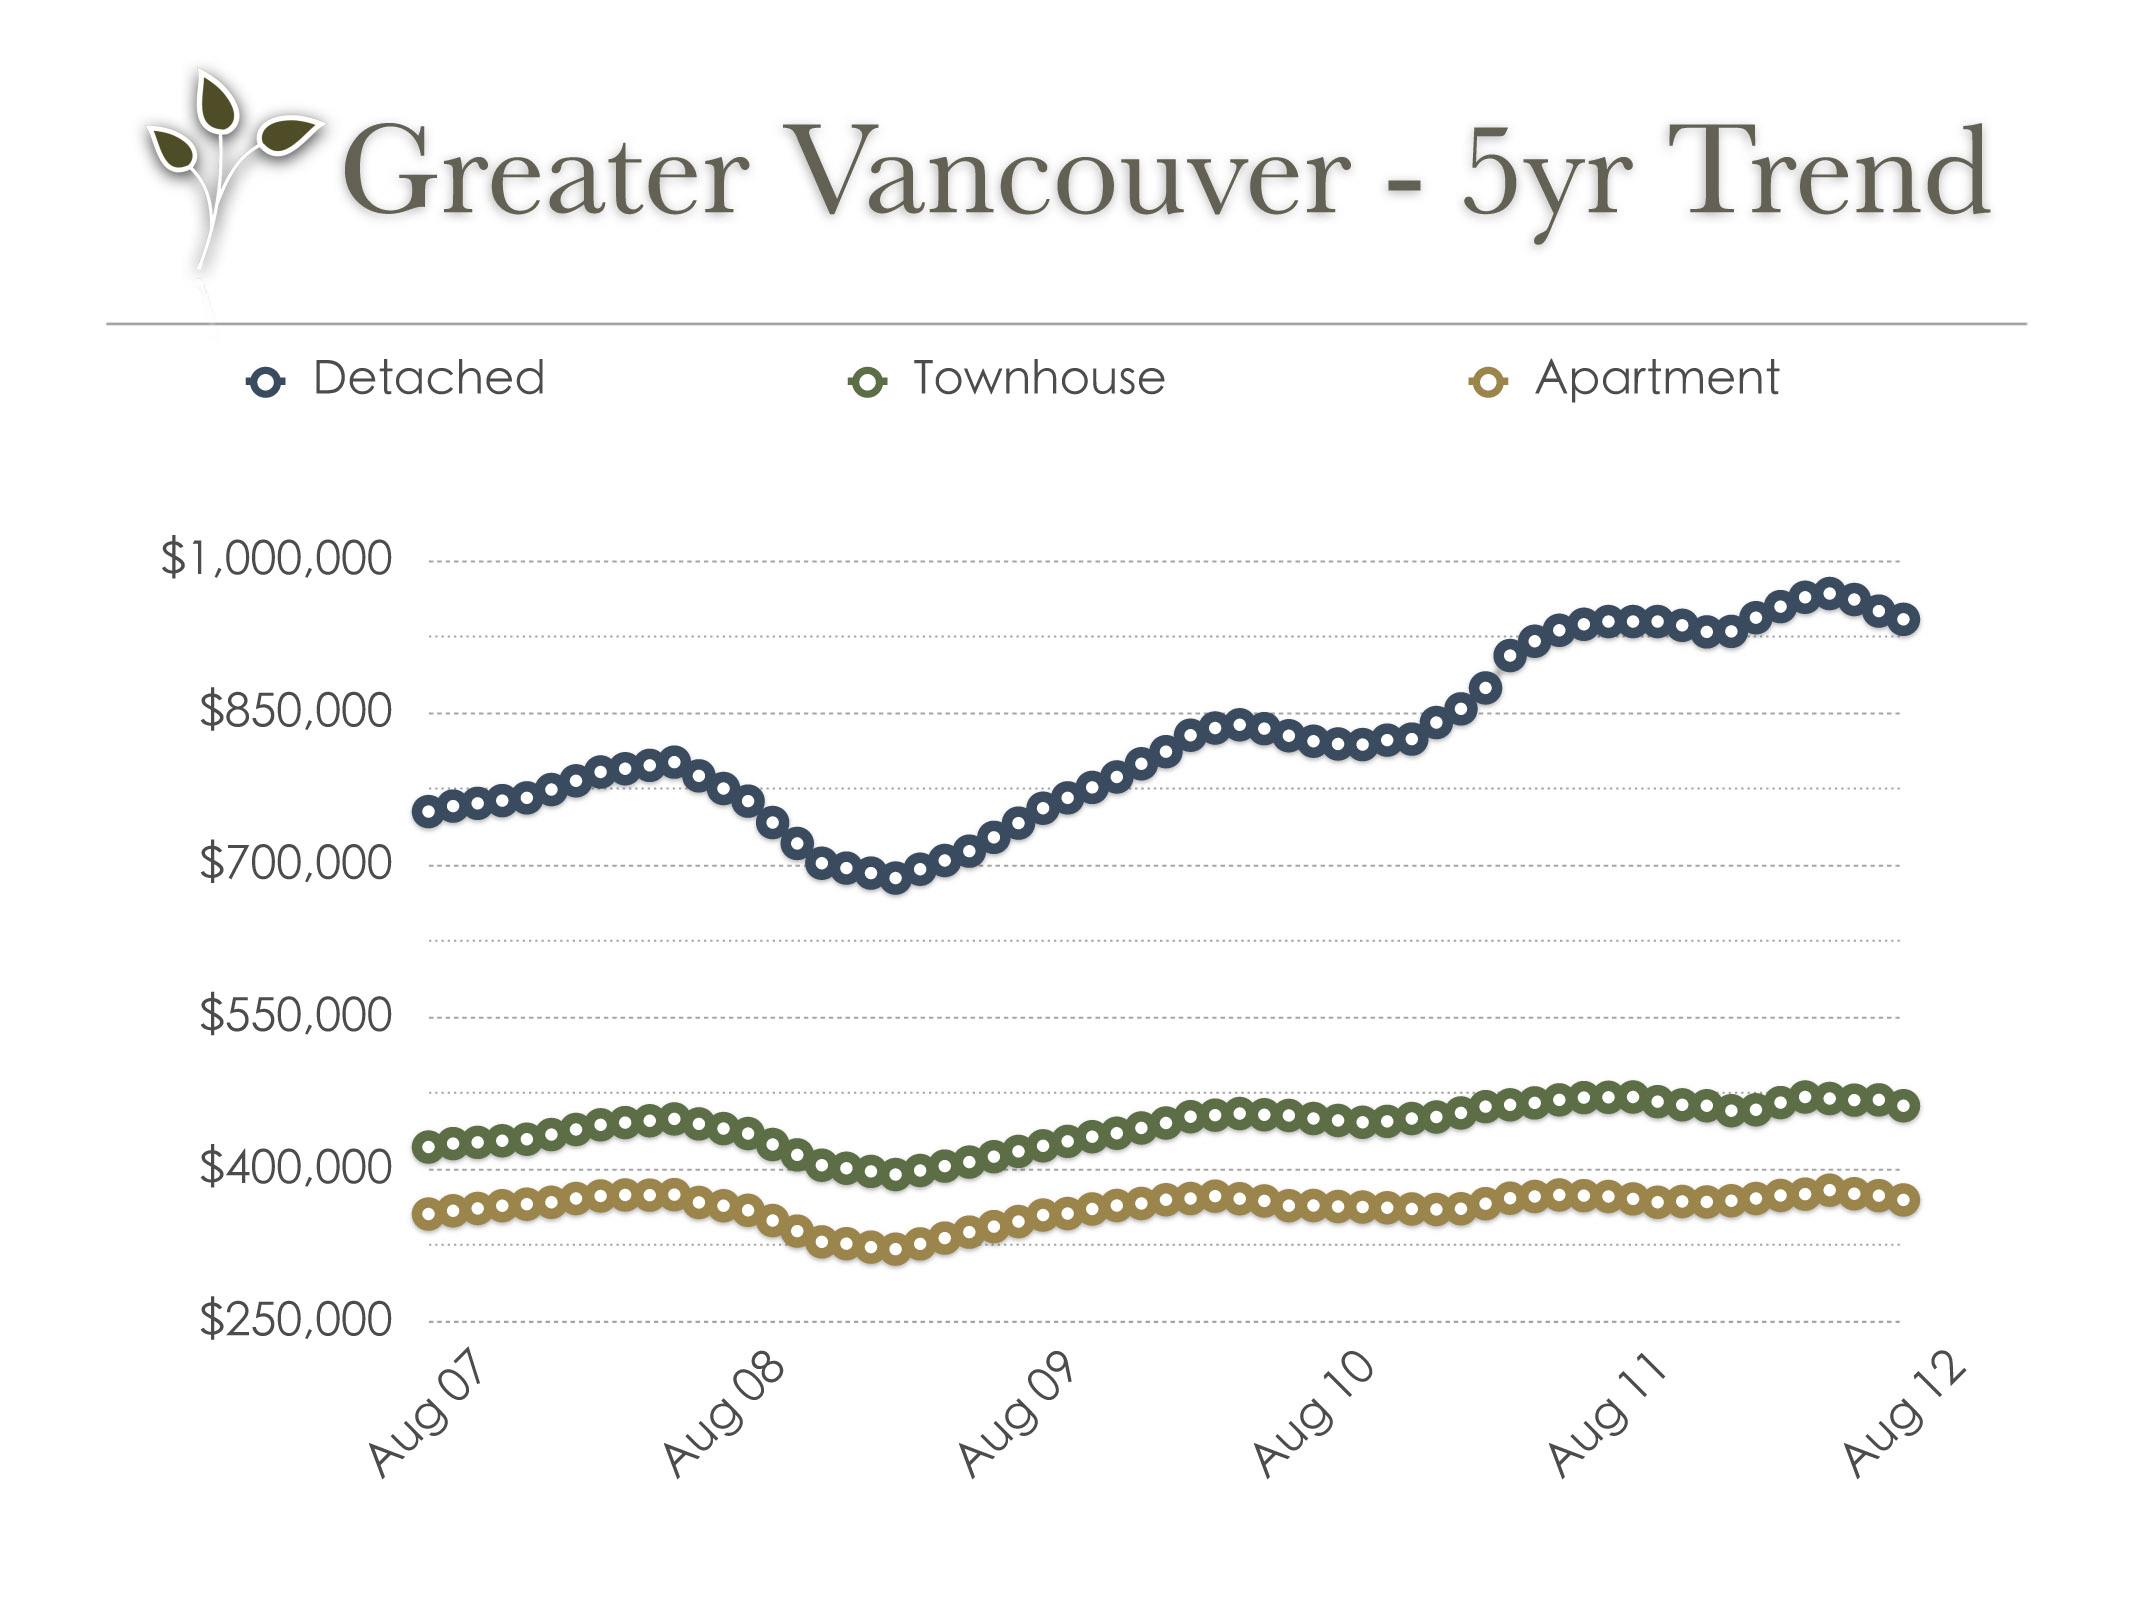 vancouver_real_estate_trend_may_2012